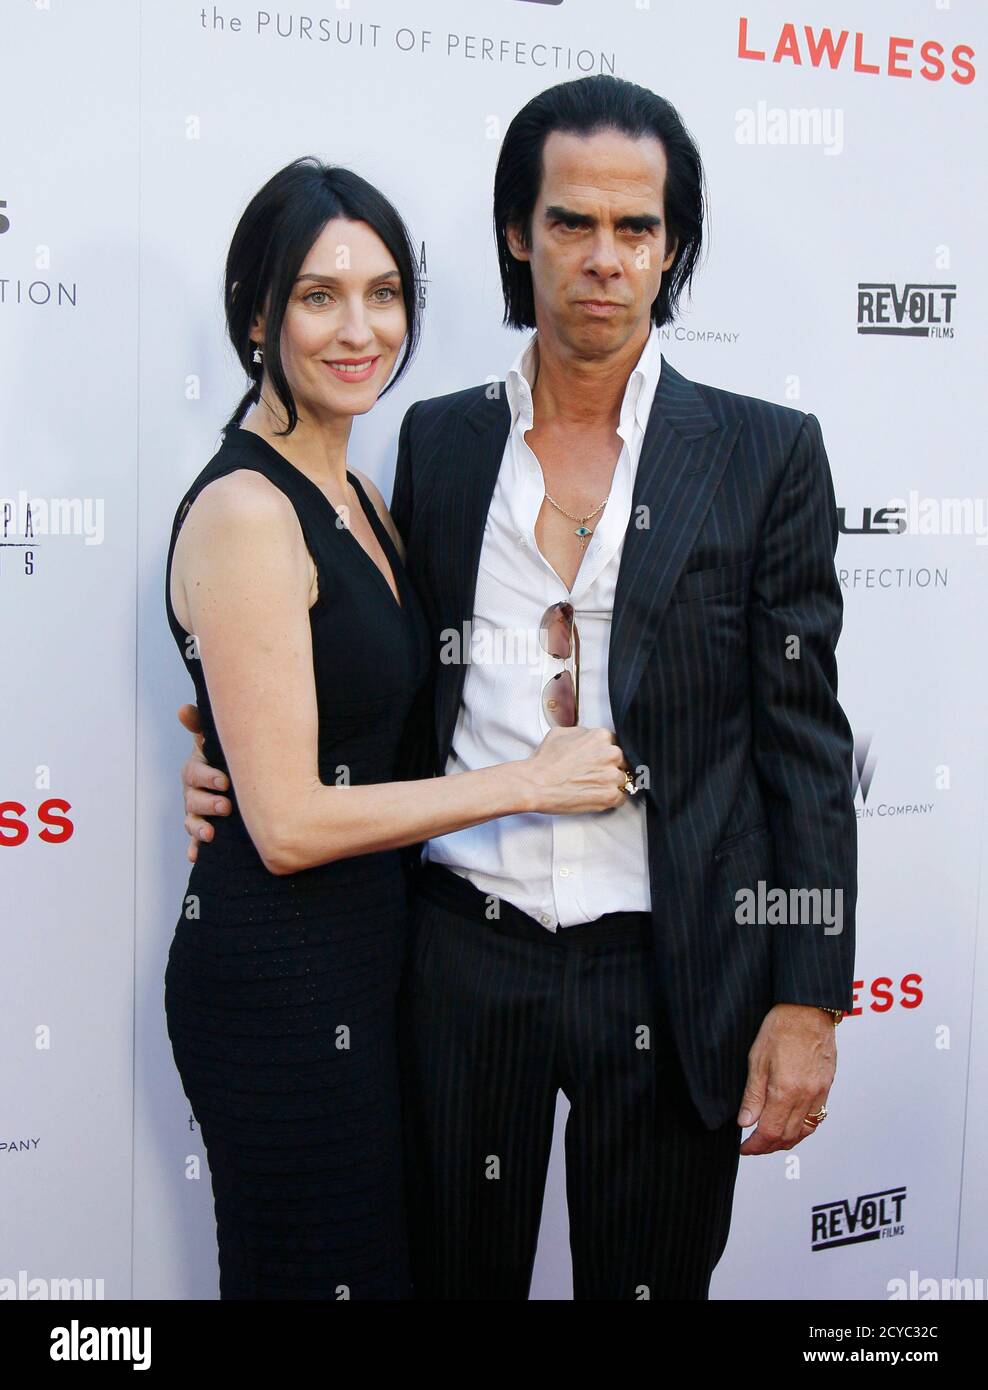 Writer and composer Nick Cave (R) and his wife Susie Bick pose at the  premiere of the film 